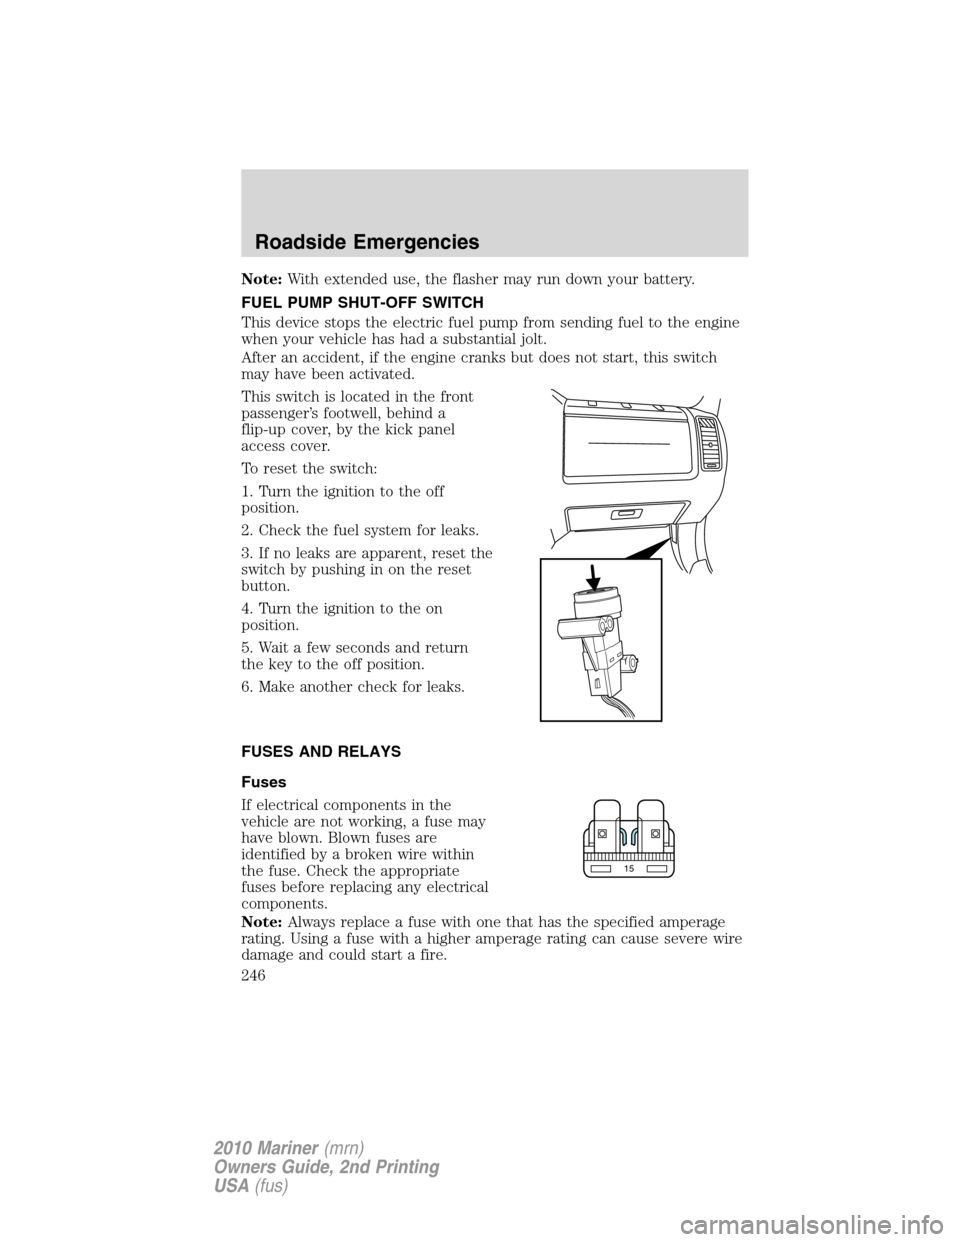 Mercury Mariner 2010  s Service Manual Note:With extended use, the flasher may run down your battery.
FUEL PUMP SHUT-OFF SWITCH
This device stops the electric fuel pump from sending fuel to the engine
when your vehicle has had a substantia